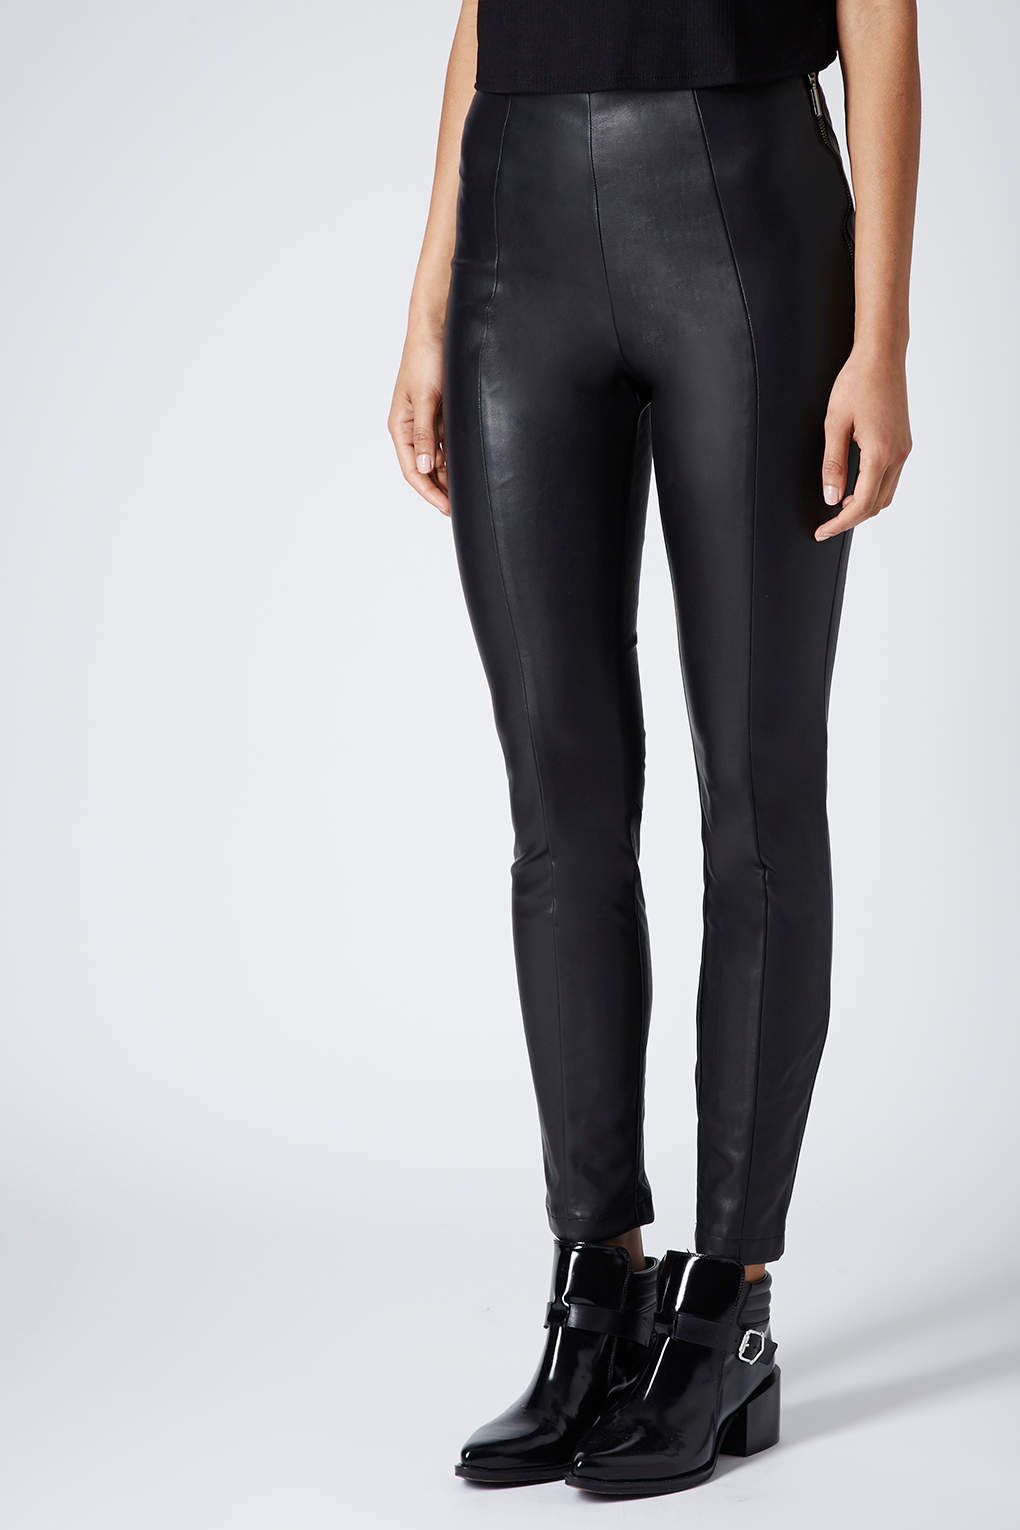 Topshop Super Soft Leather Look Skinny Trousers In Black Lyst